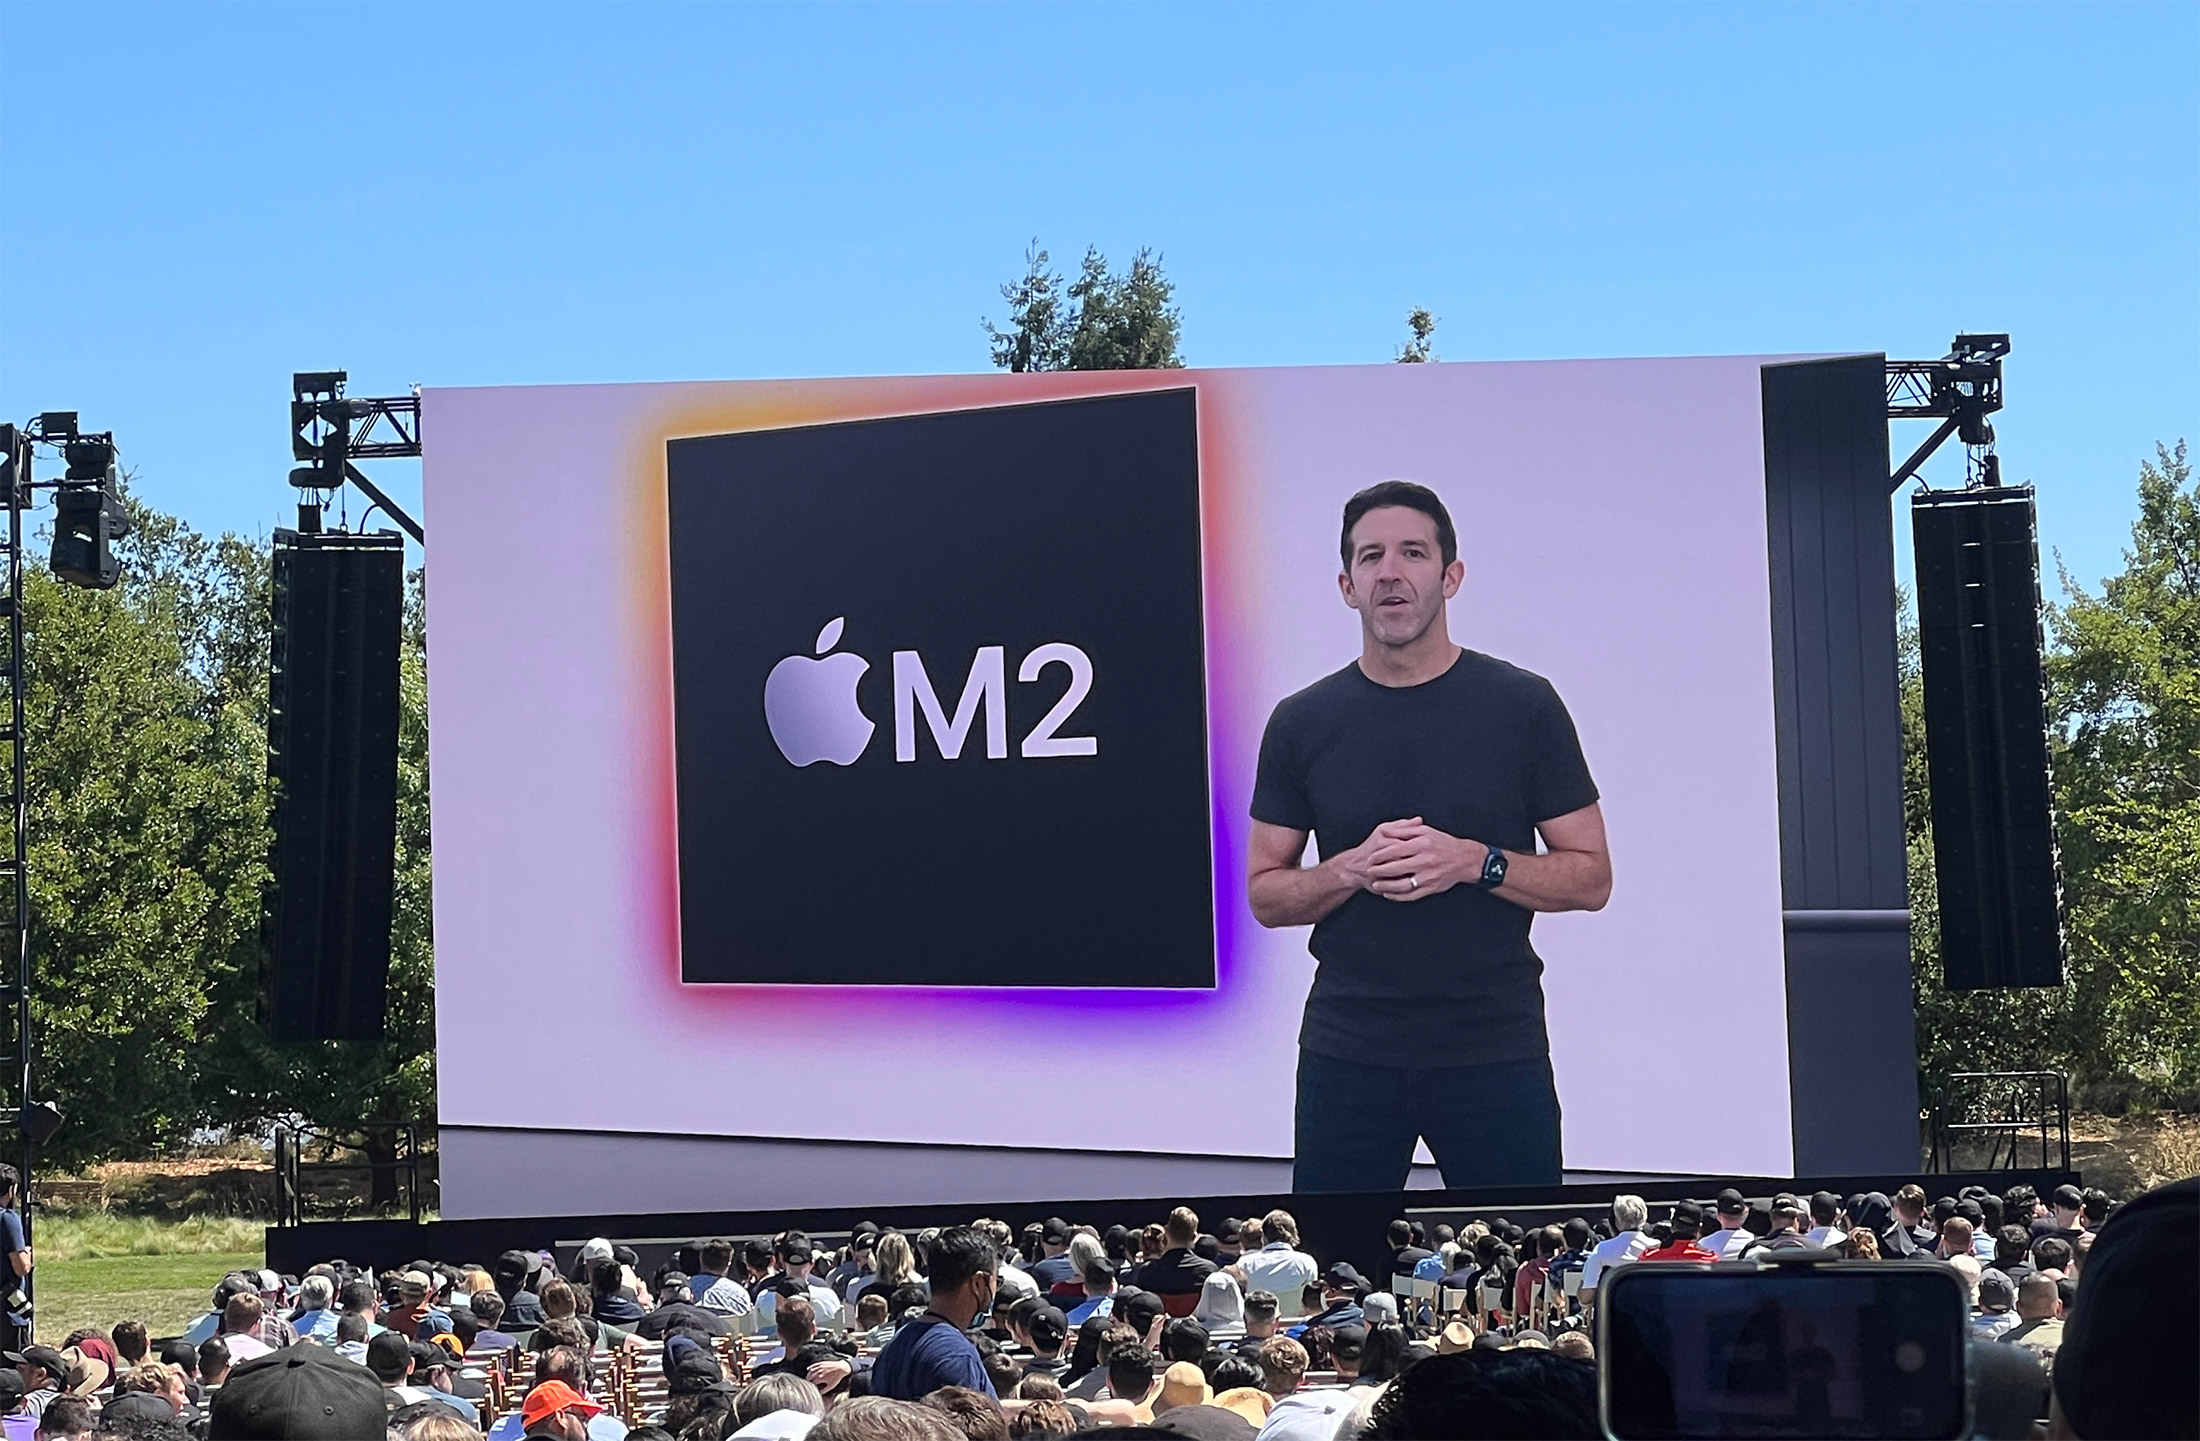 Apple’s M2 chip announcement at WWDC 2022.